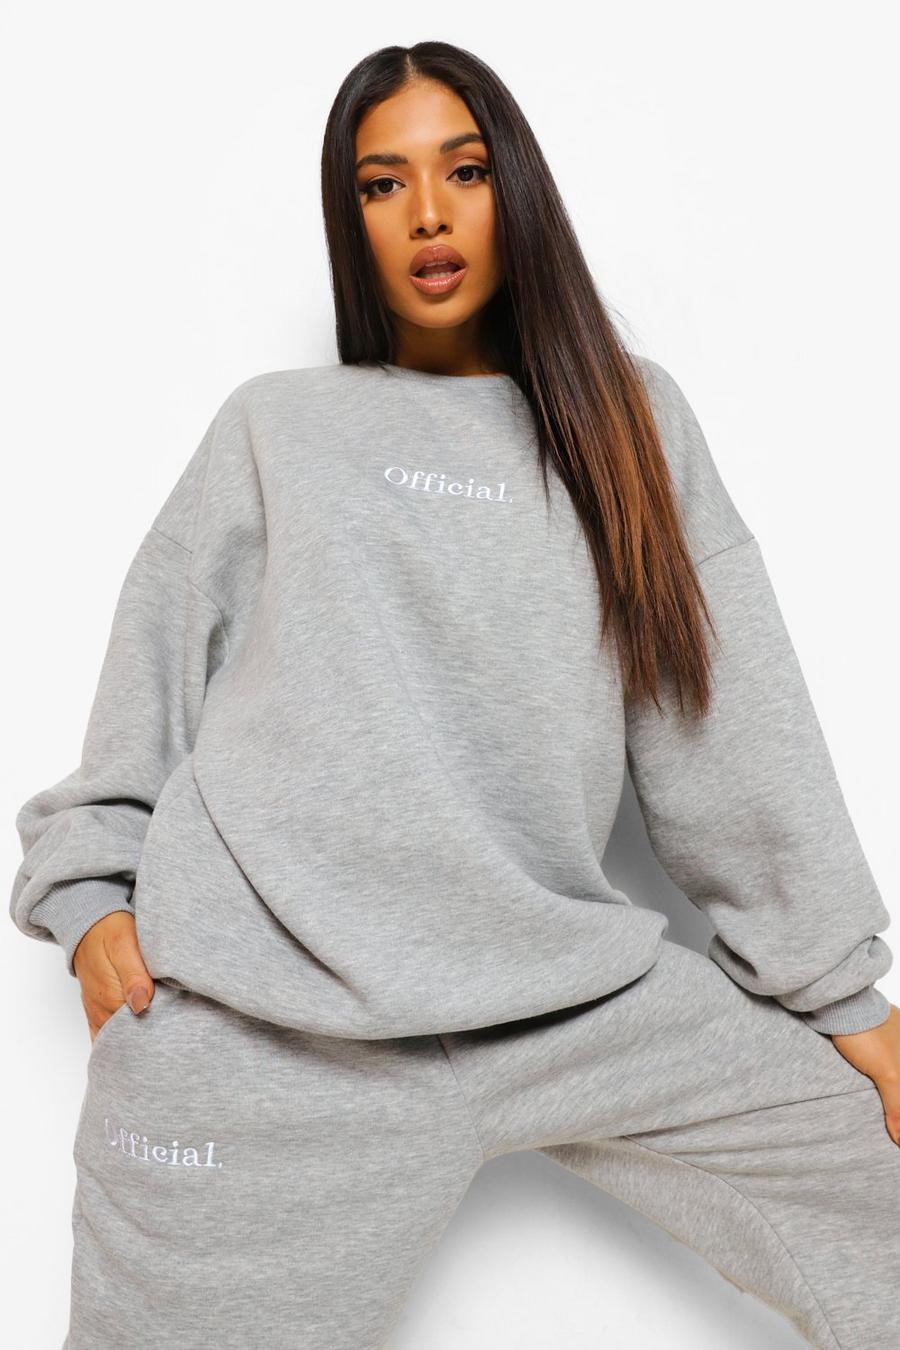 Petite - Sweat oversize Official, Grey marl image number 1